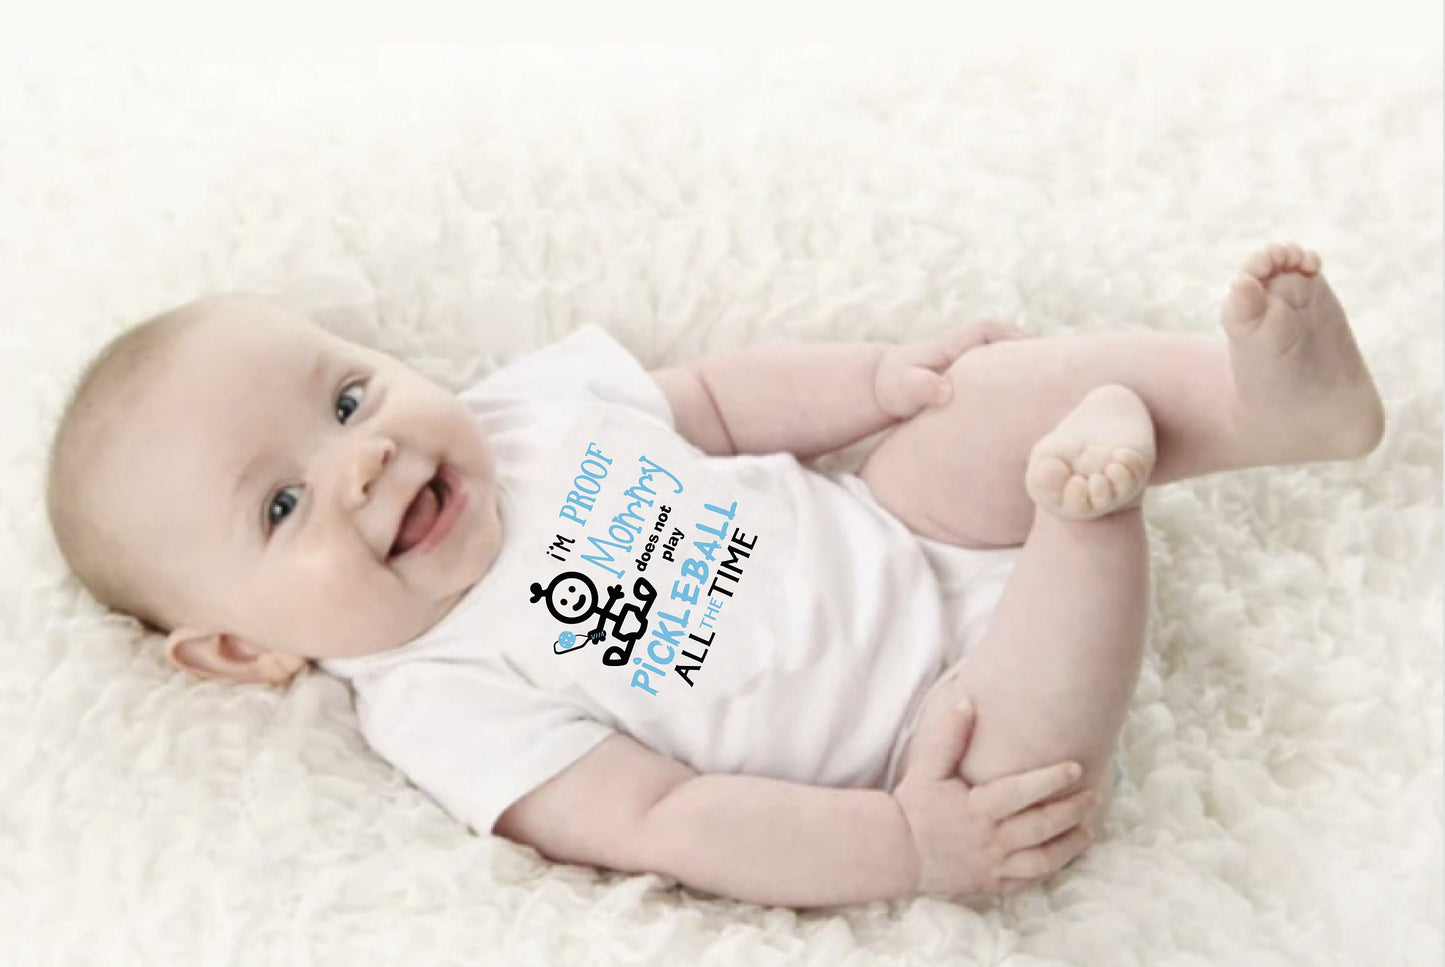 Proof That Mommy Does Not Play Pickleball All The Time | Infant Short Sleeve Onesie | 100% Cotton